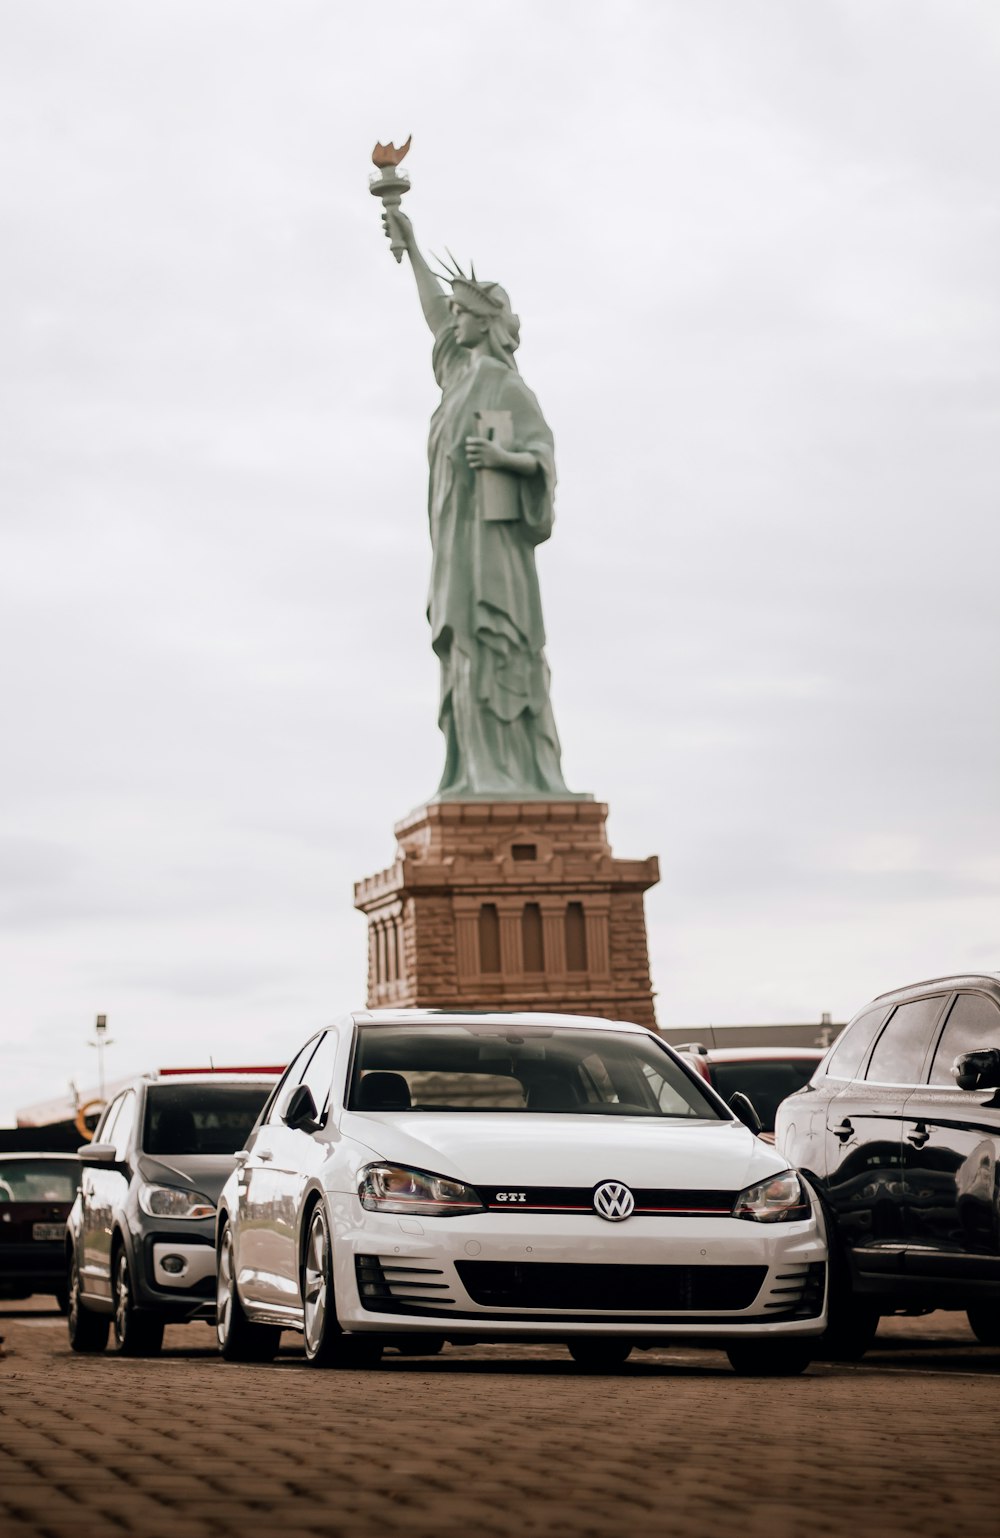 cars parked in front of the statue of liberty